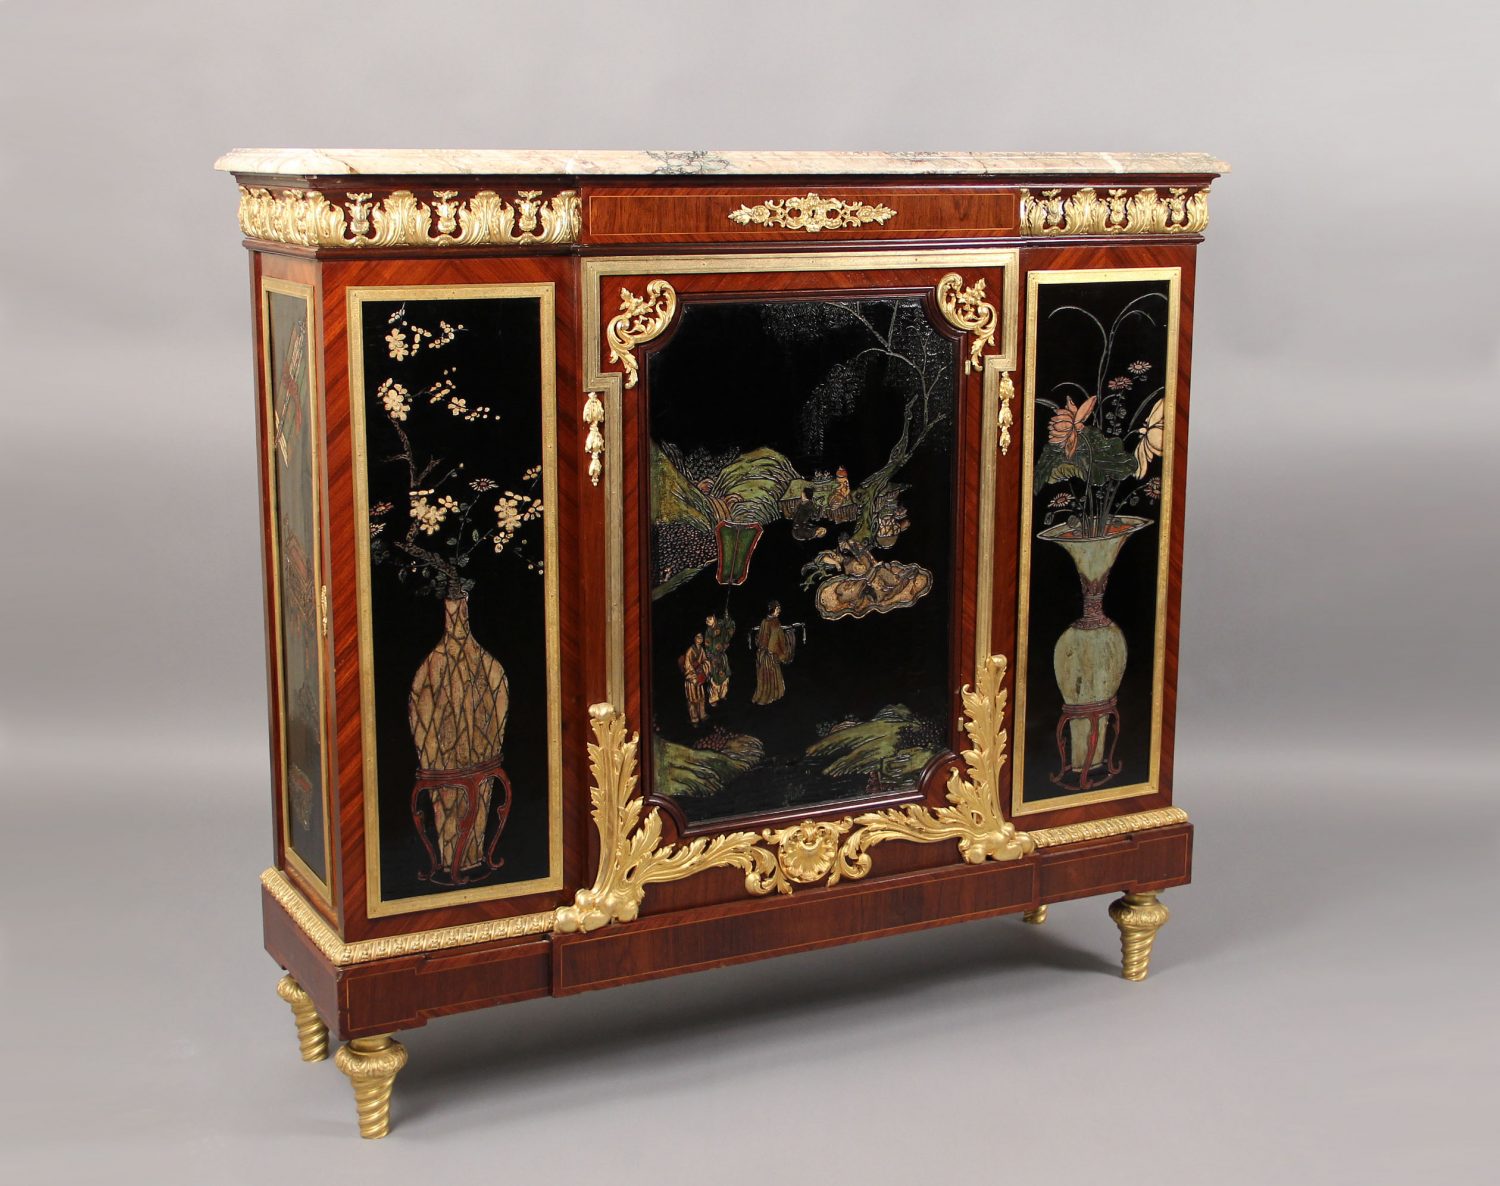 Gilt bronze mounted style coramandel lacquer cabinet